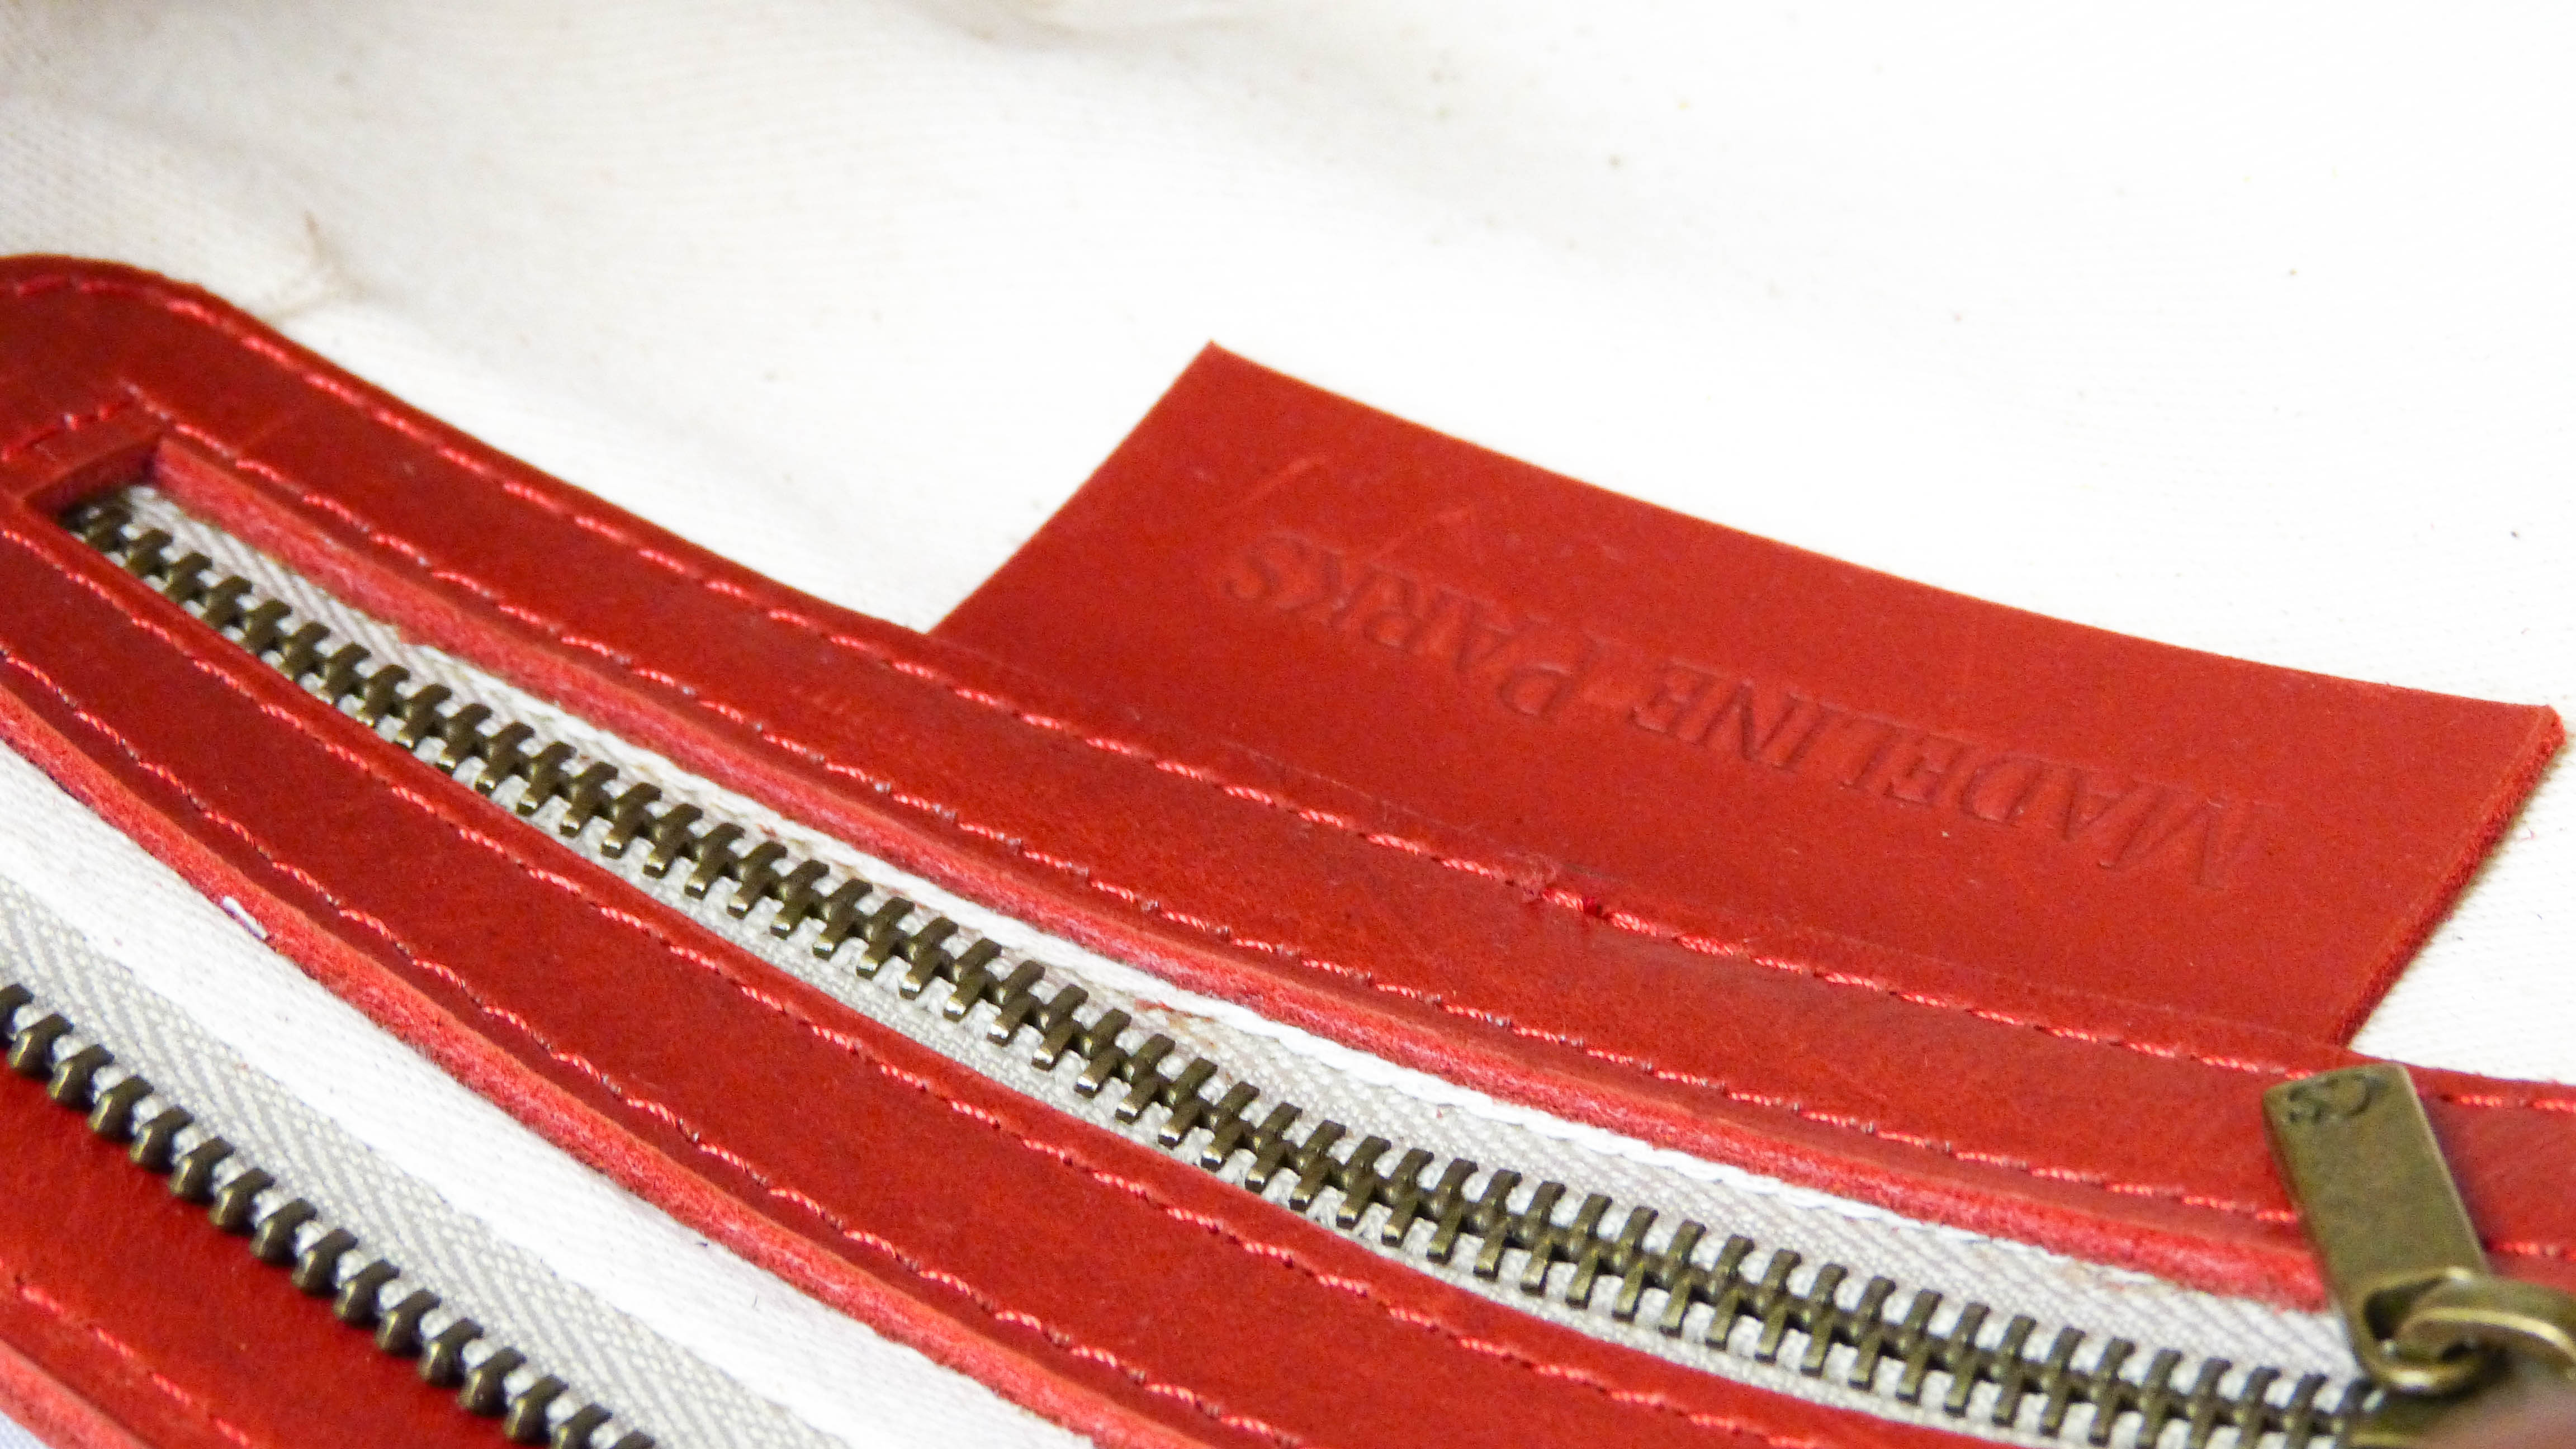 Close-up of the Jessica Leather Purse in Cherry, showcasing a white fabric with a red leather label, a zipper, and intricate stitching. Handmade by Ethiopian artisans for Madeline Parks Designs.